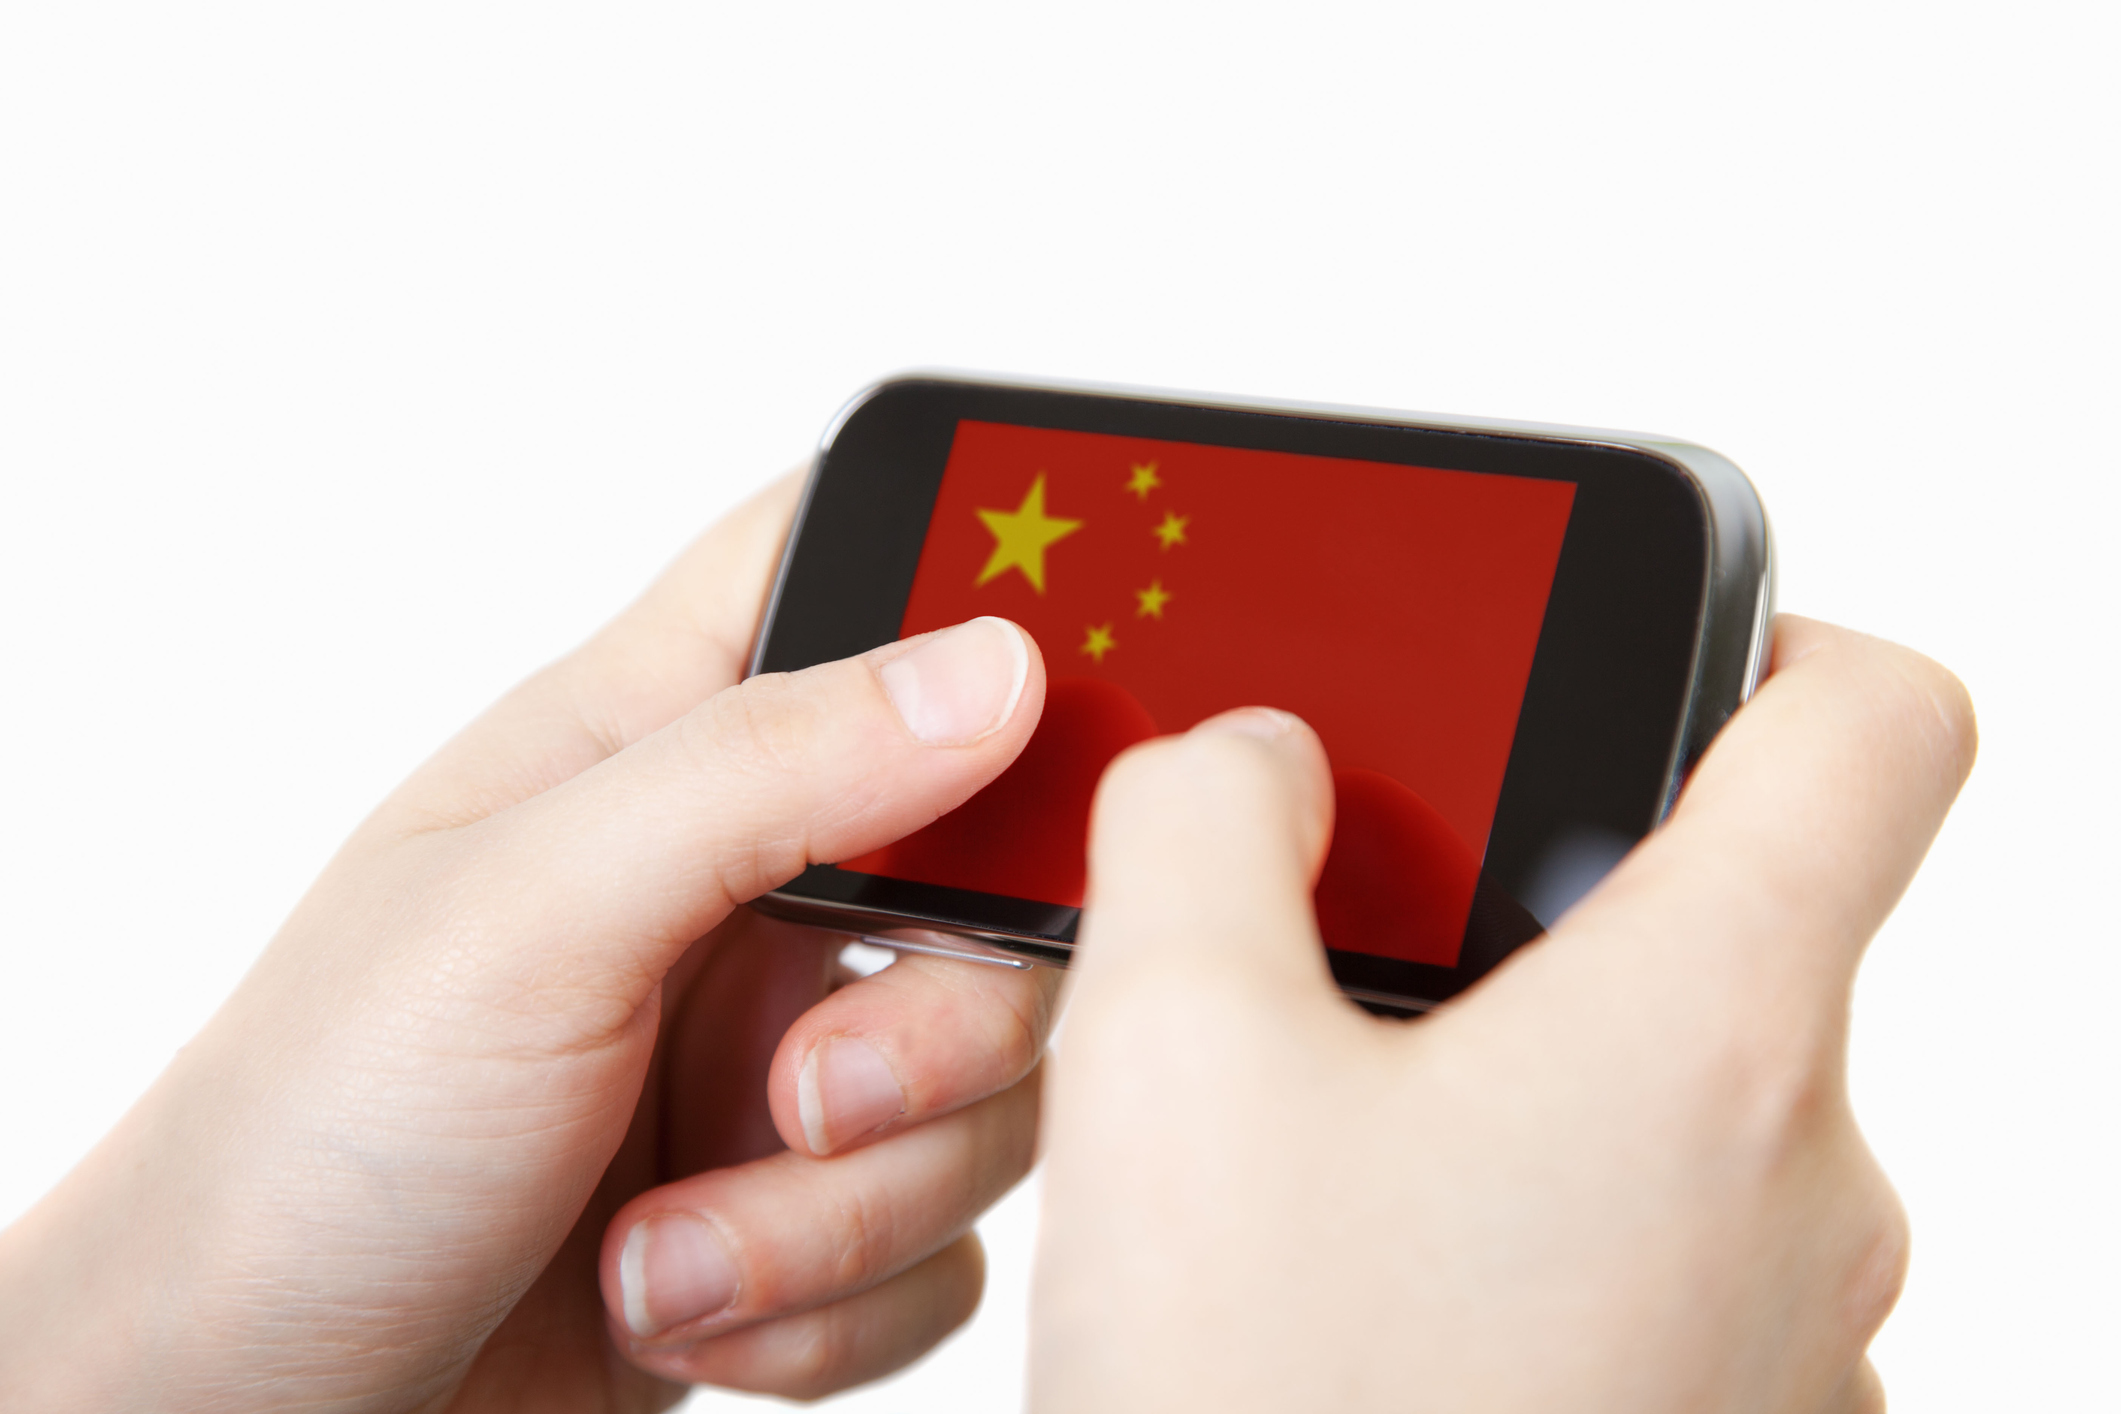 Close up of a human hand holding smart phone with the flag of China in the display.